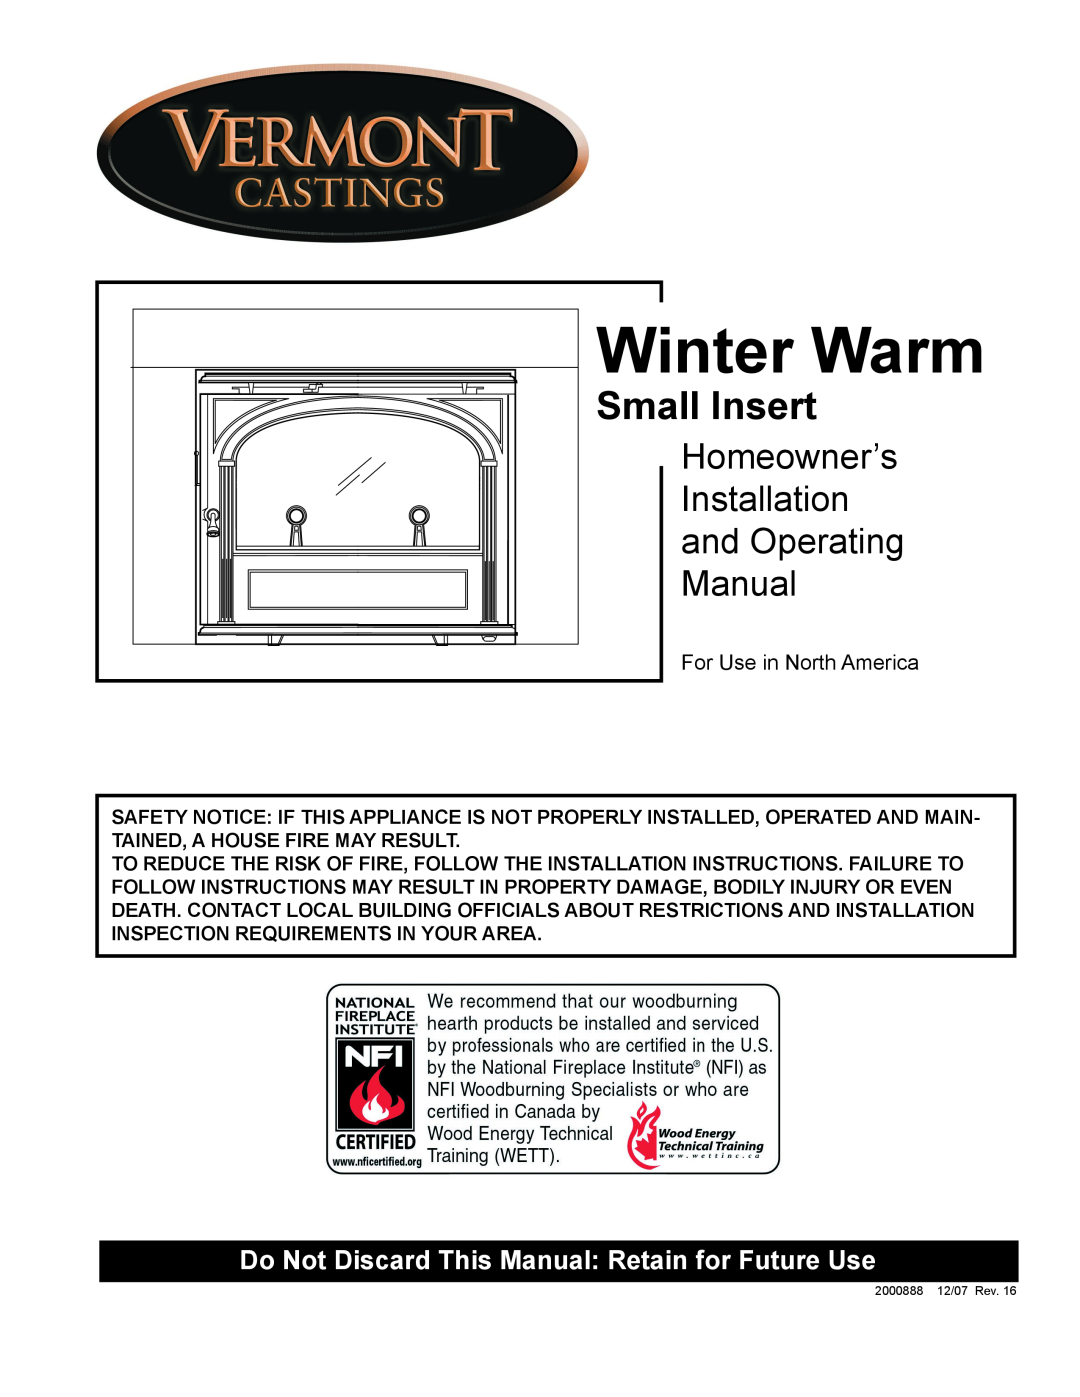 CFM Corporation Winter Warm - Small Insert installation instructions Homeowner’s, Installation, and Operating, Manual 